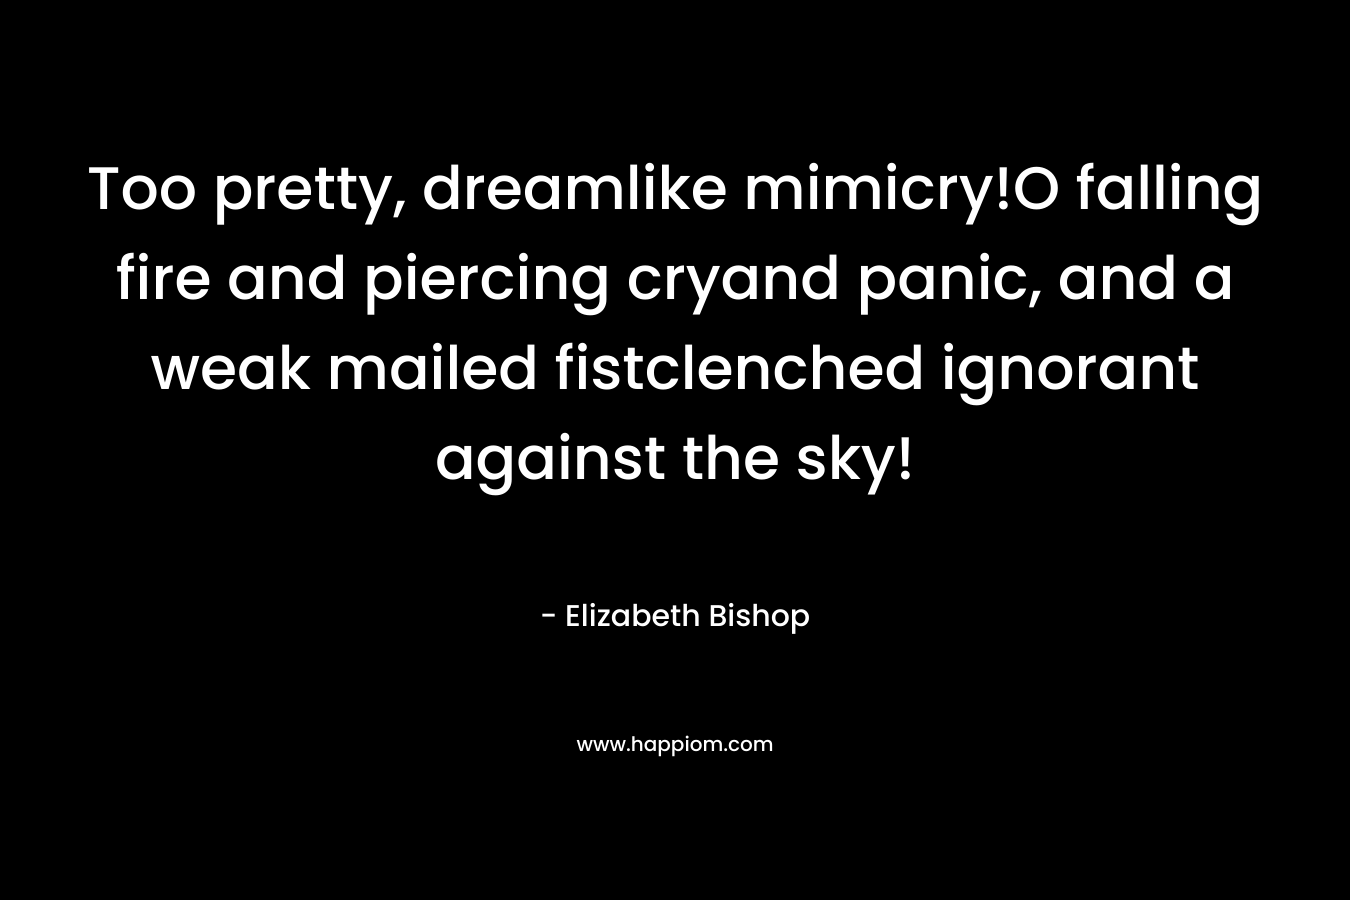 Too pretty, dreamlike mimicry!O falling fire and piercing cryand panic, and a weak mailed fistclenched ignorant against the sky! – Elizabeth Bishop